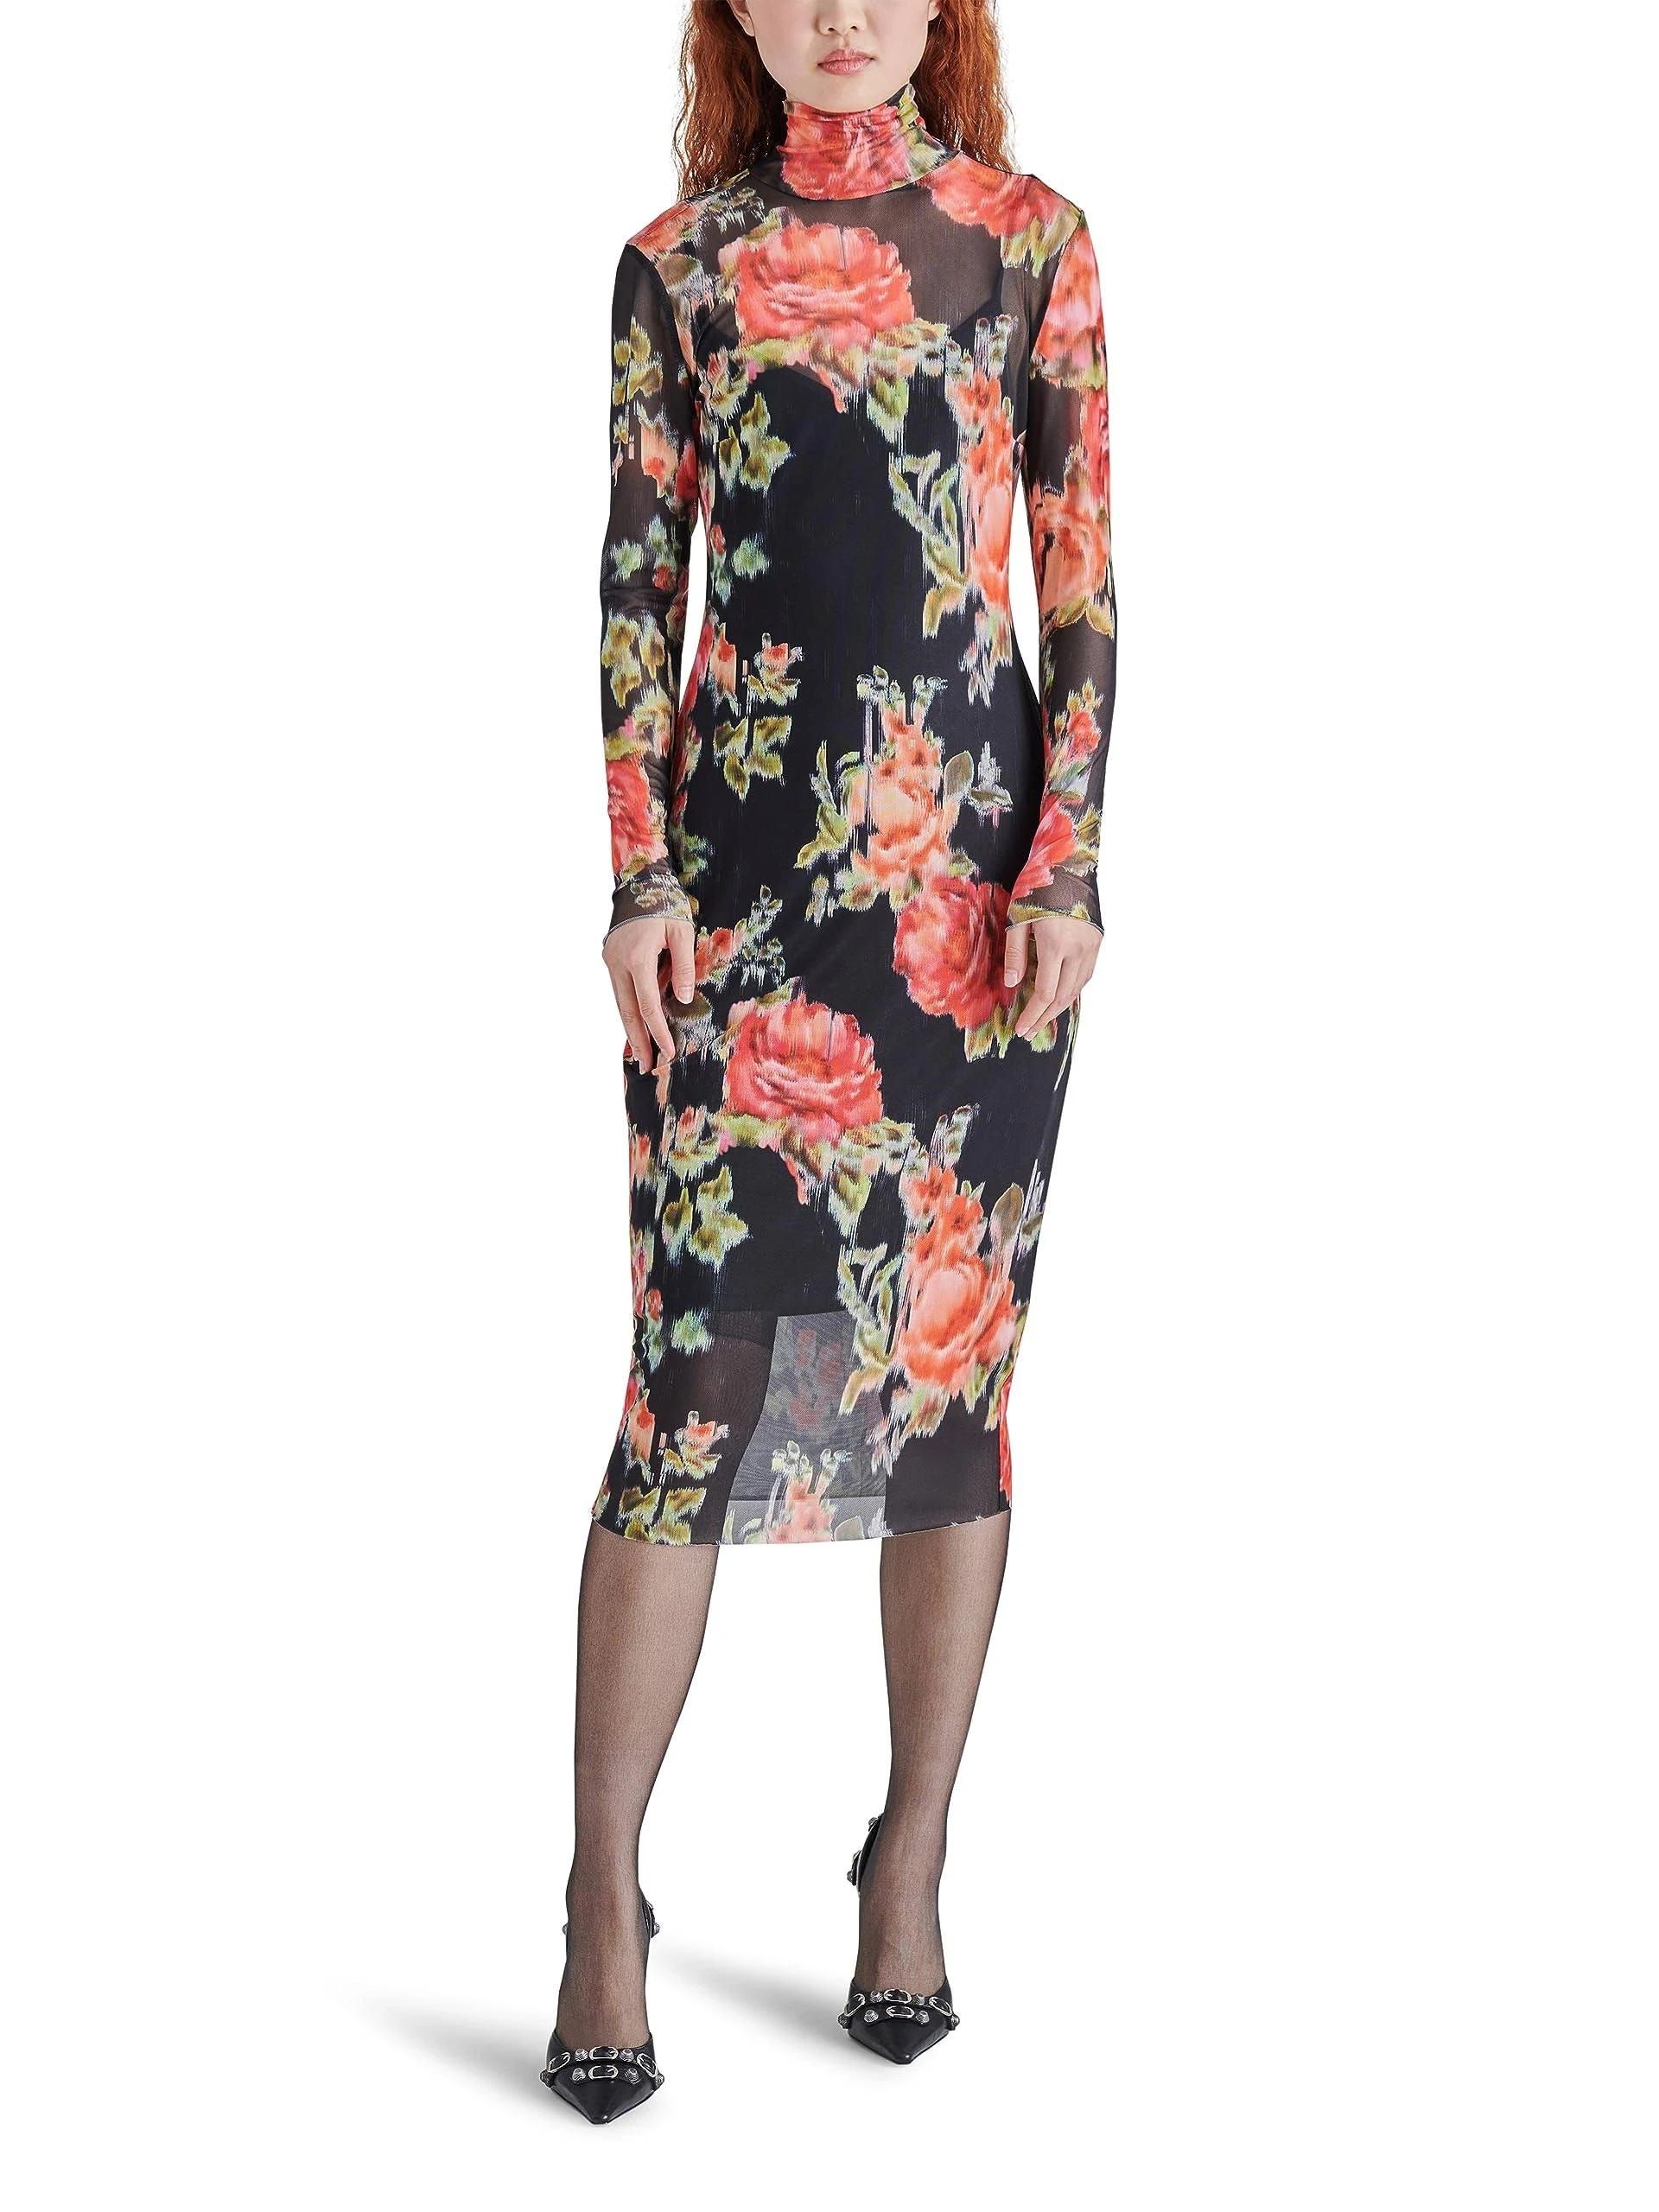 Elegant Floral Midi Dress with High Neckline and Long Sleeves | Image